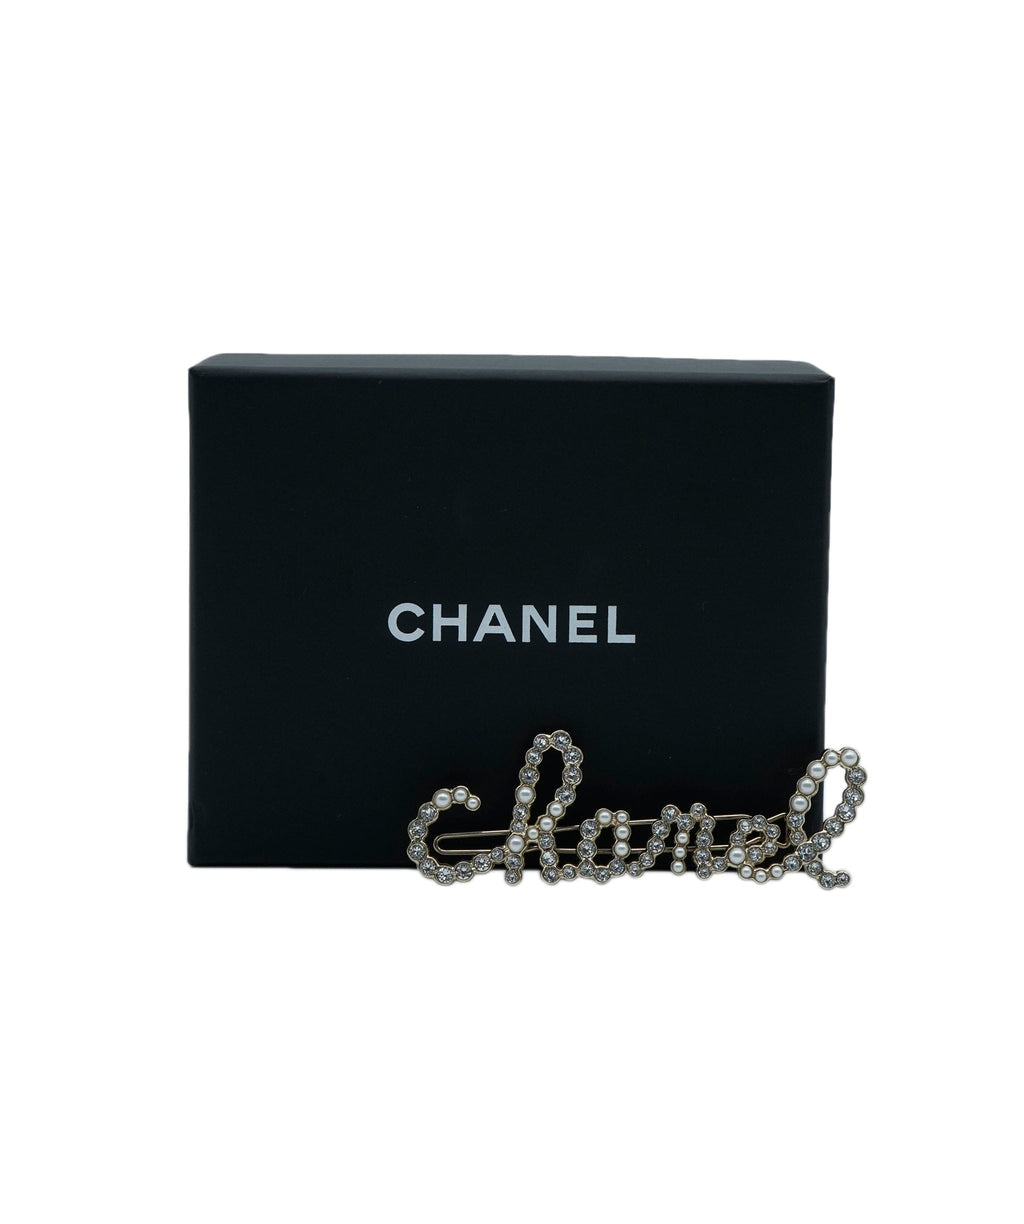 ✨Authentic 2019/20 CHANEL VIP Gold Chain Link Hair Clip // Barrette